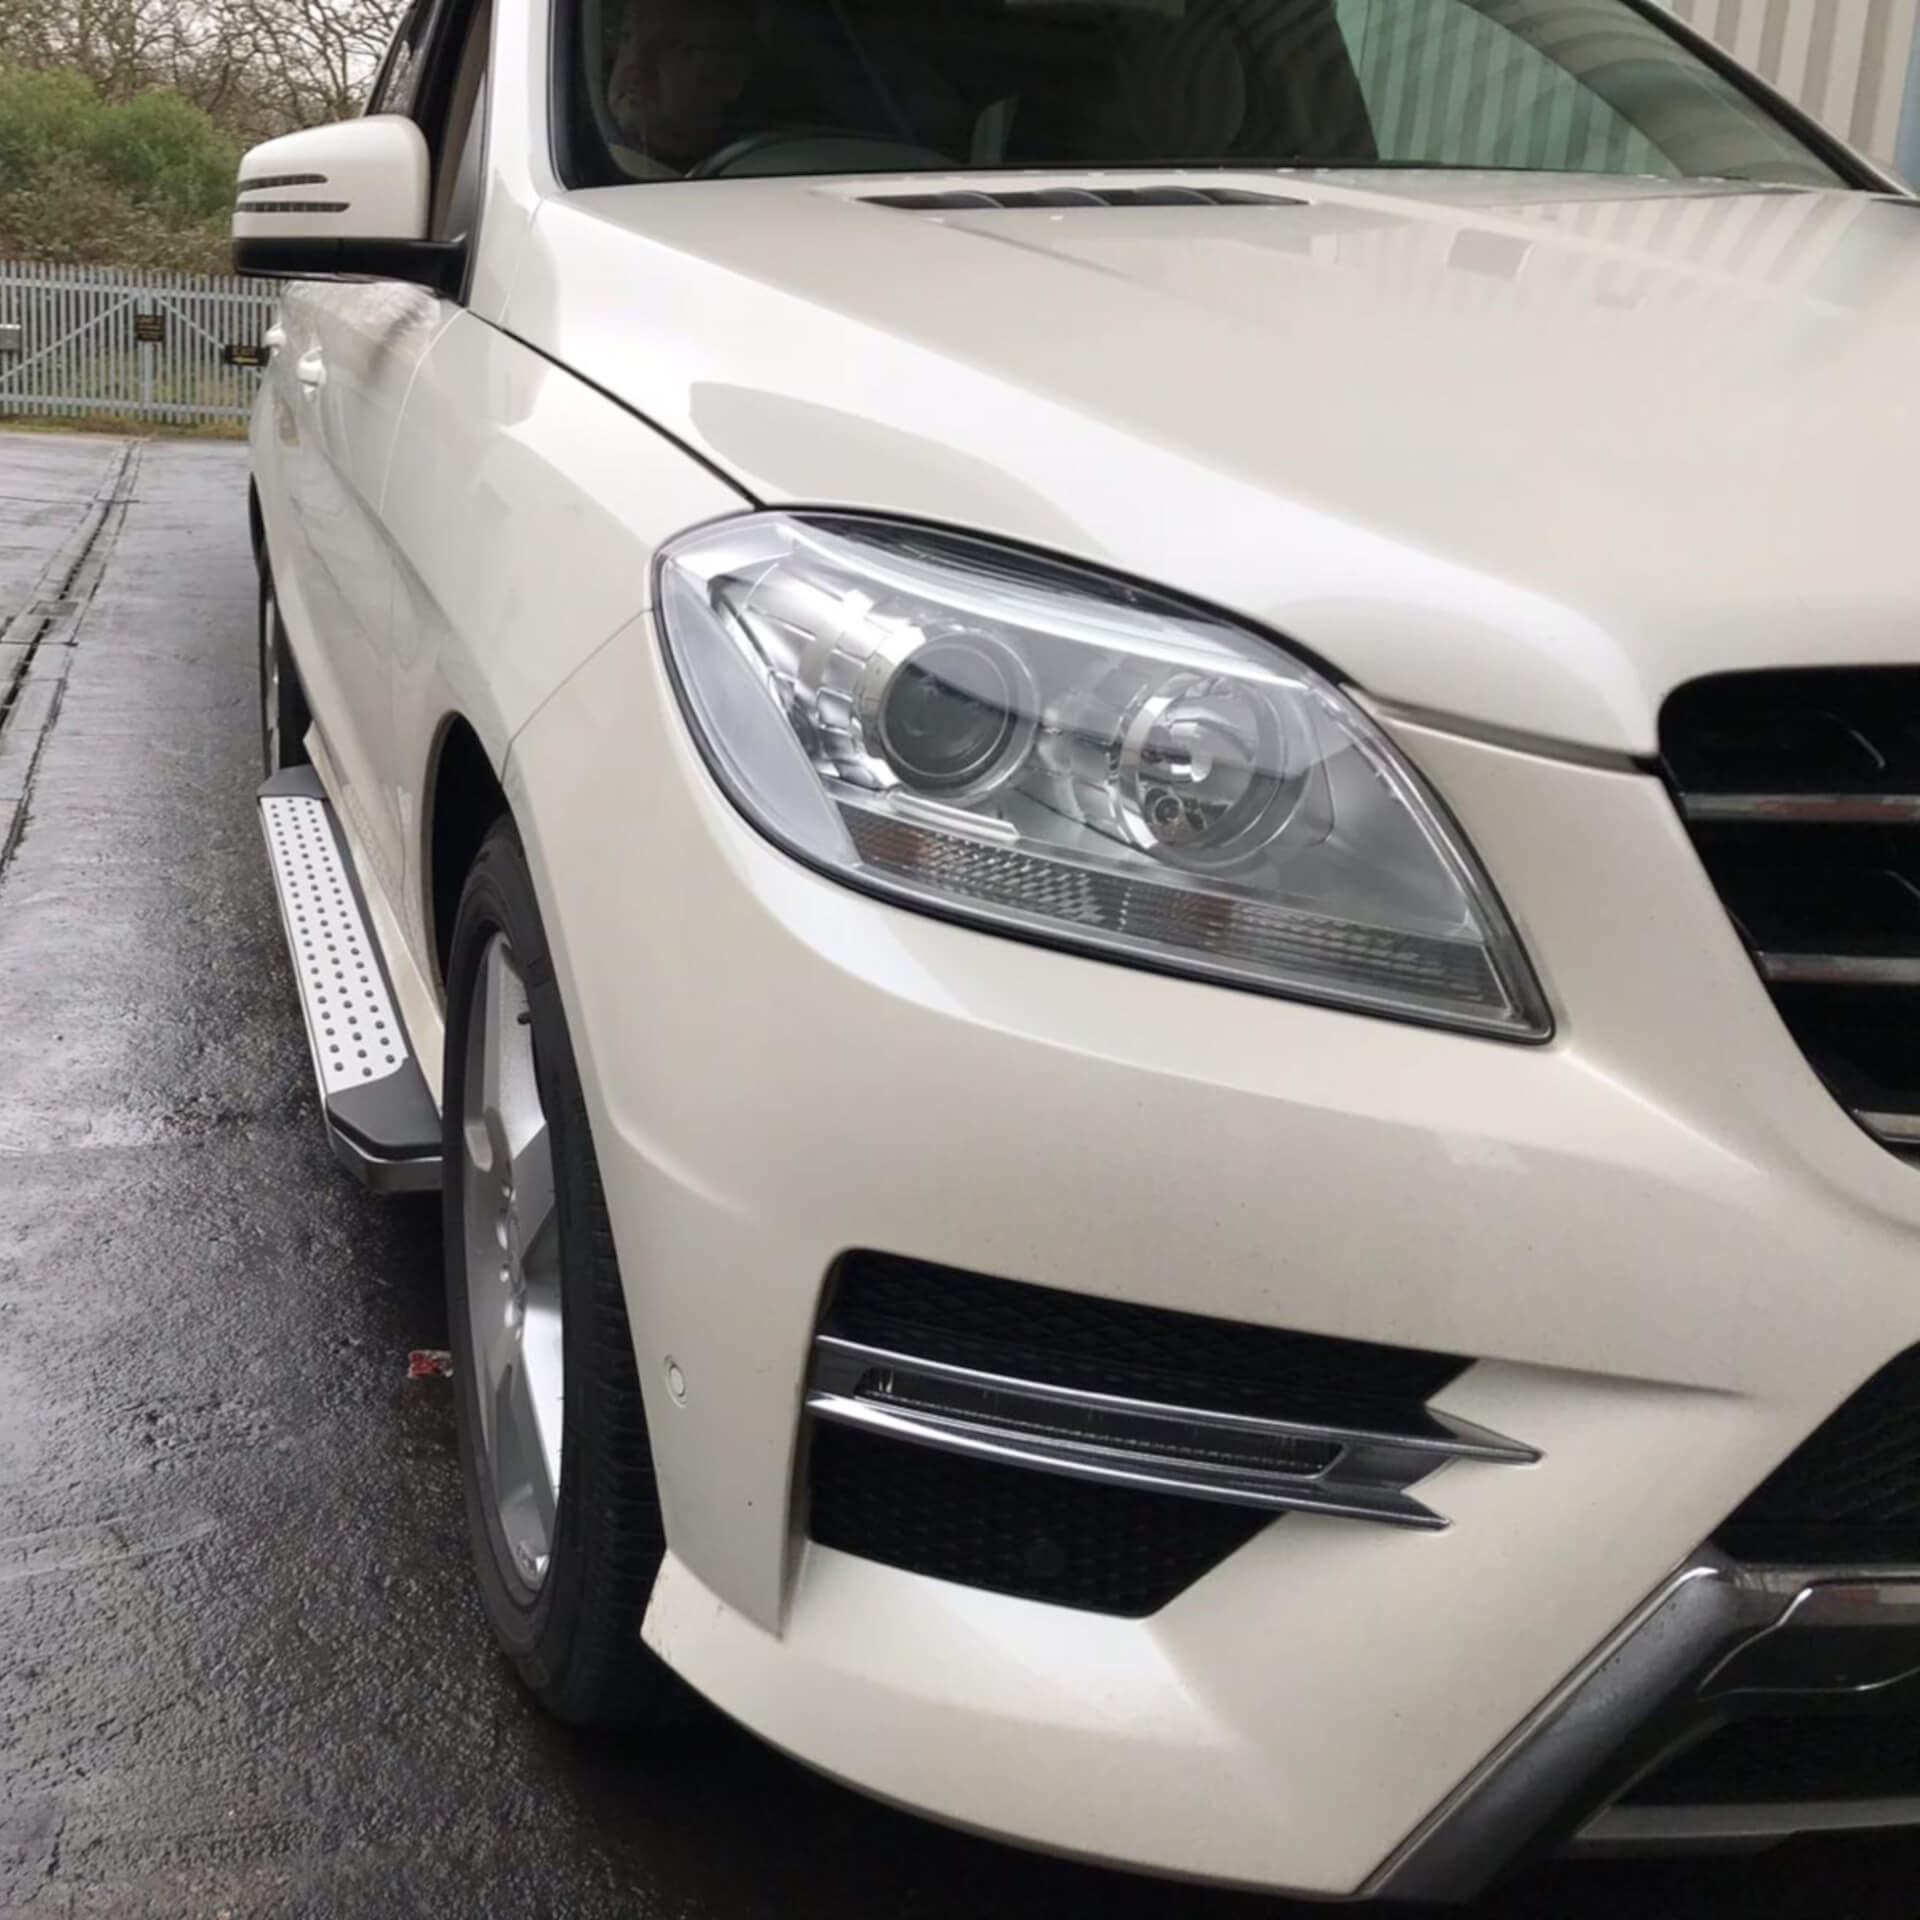 Direct4x4 accessories for Mercedes ML vehicles with a photo of the front of a white Mercedes ML looking down the drivers at the Freedom side steps